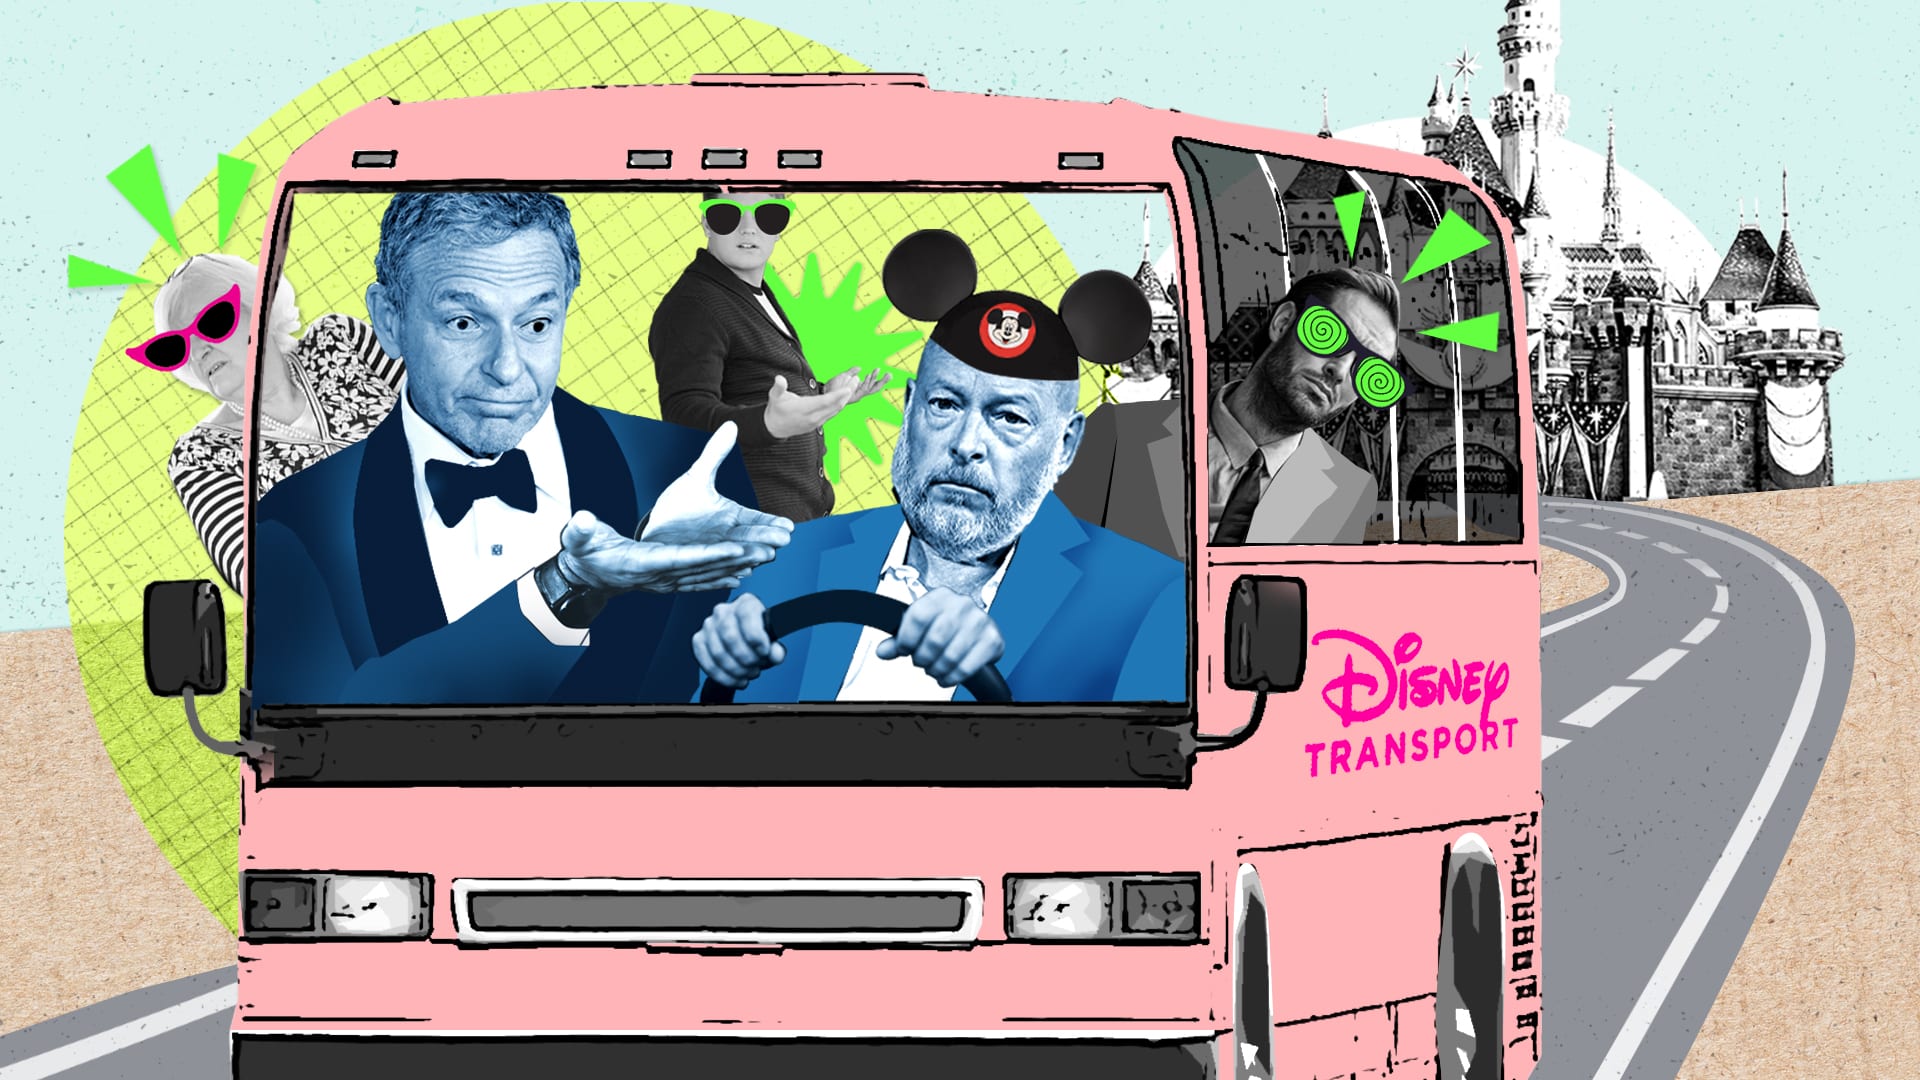 Disney's wildest ride: Iger, Chapek and the making of an epic succession mess